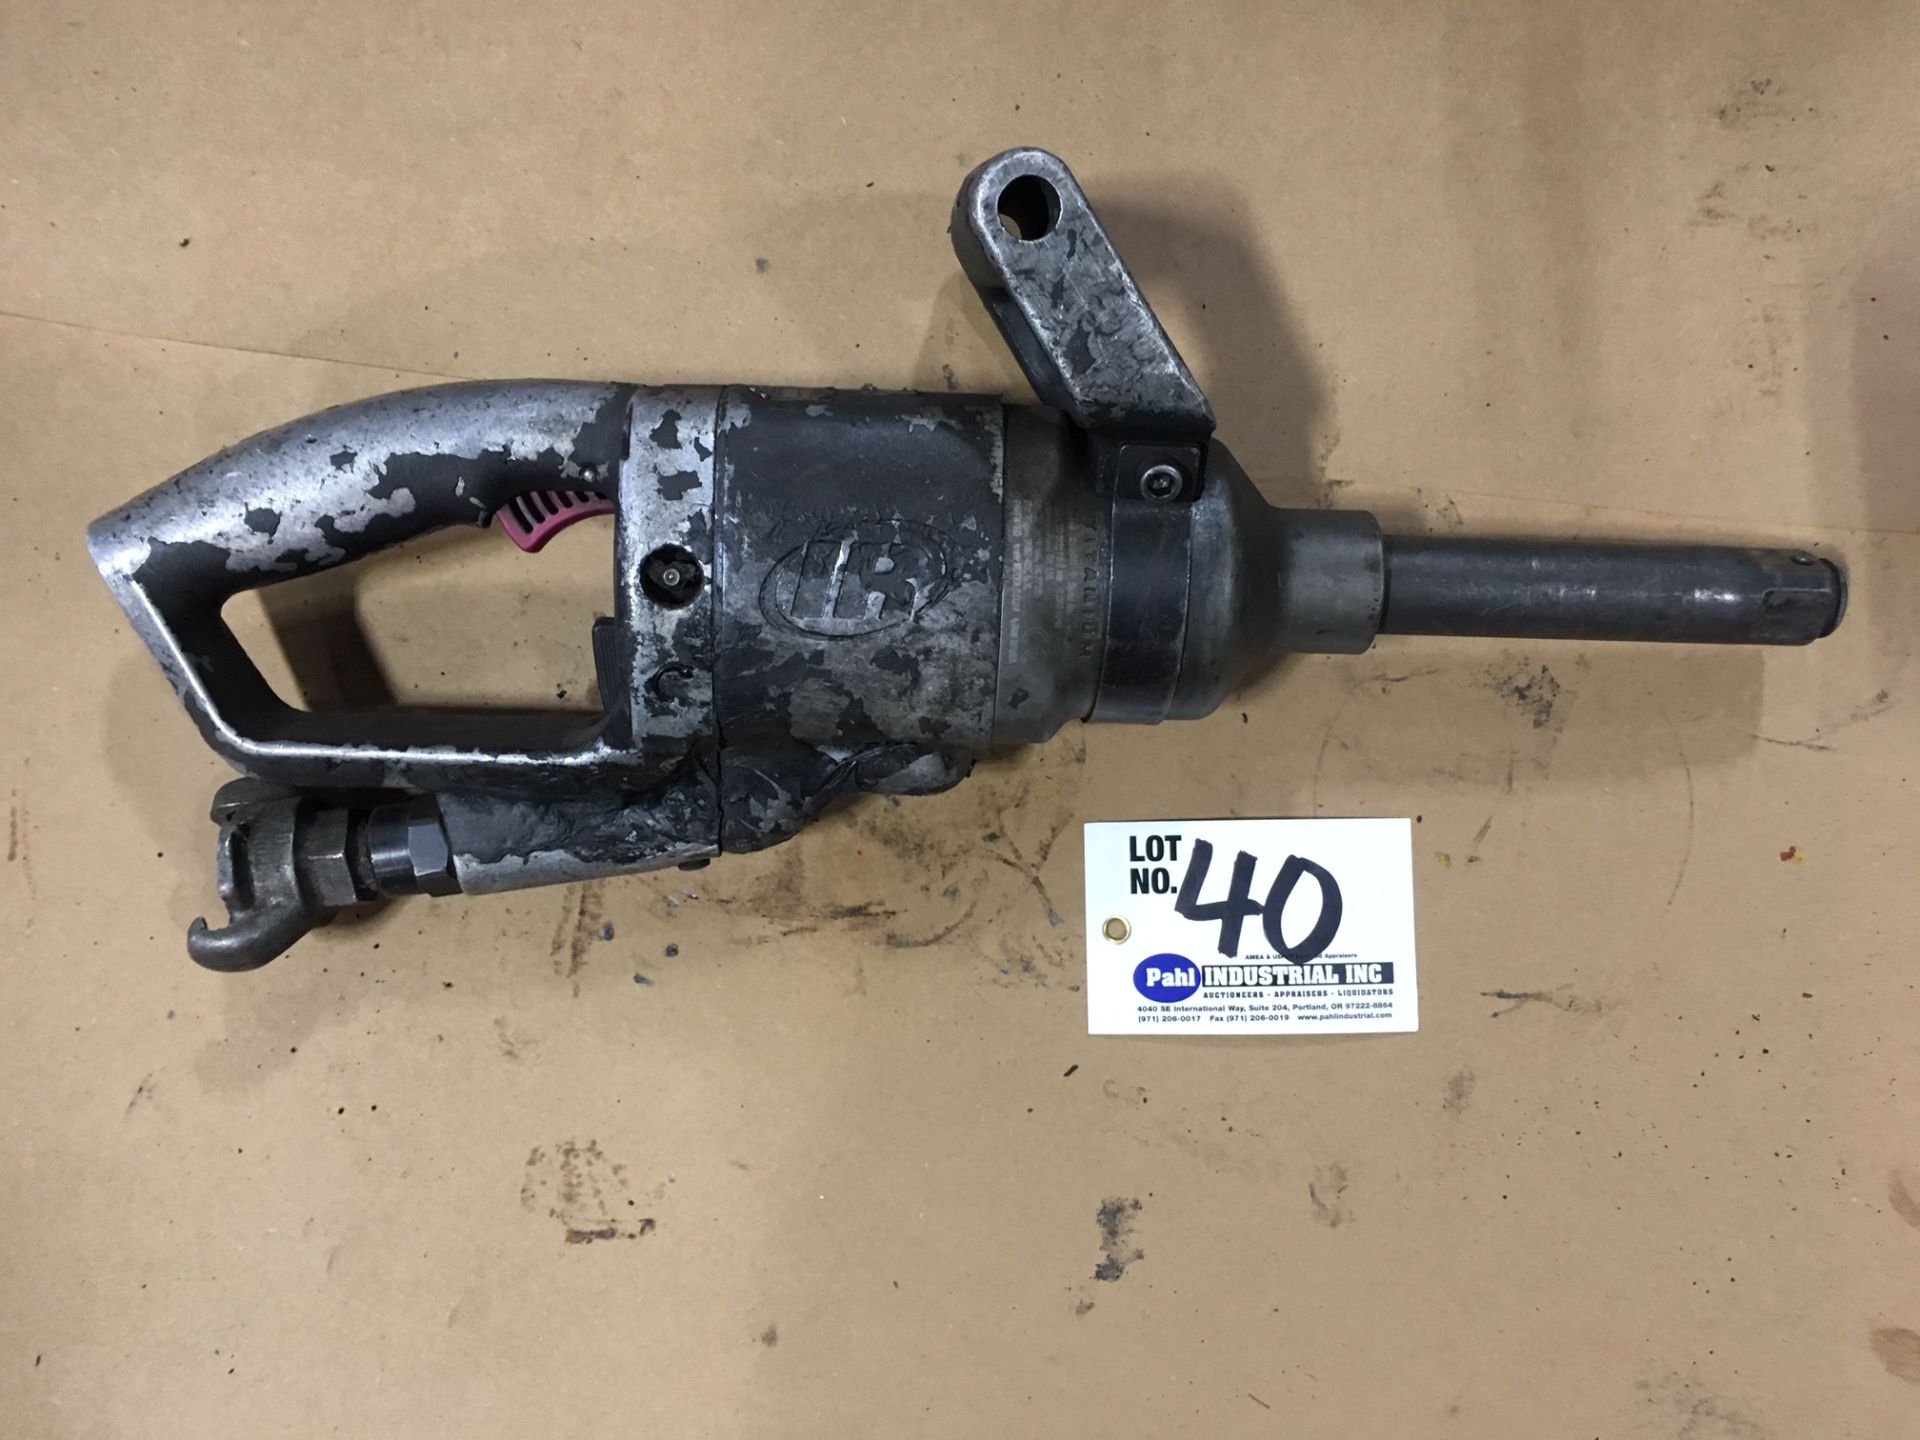 Ingersoll Rand 1" Pneumatic Impact Wrench w/5 1/2" shank c/w 1" air hose fitting